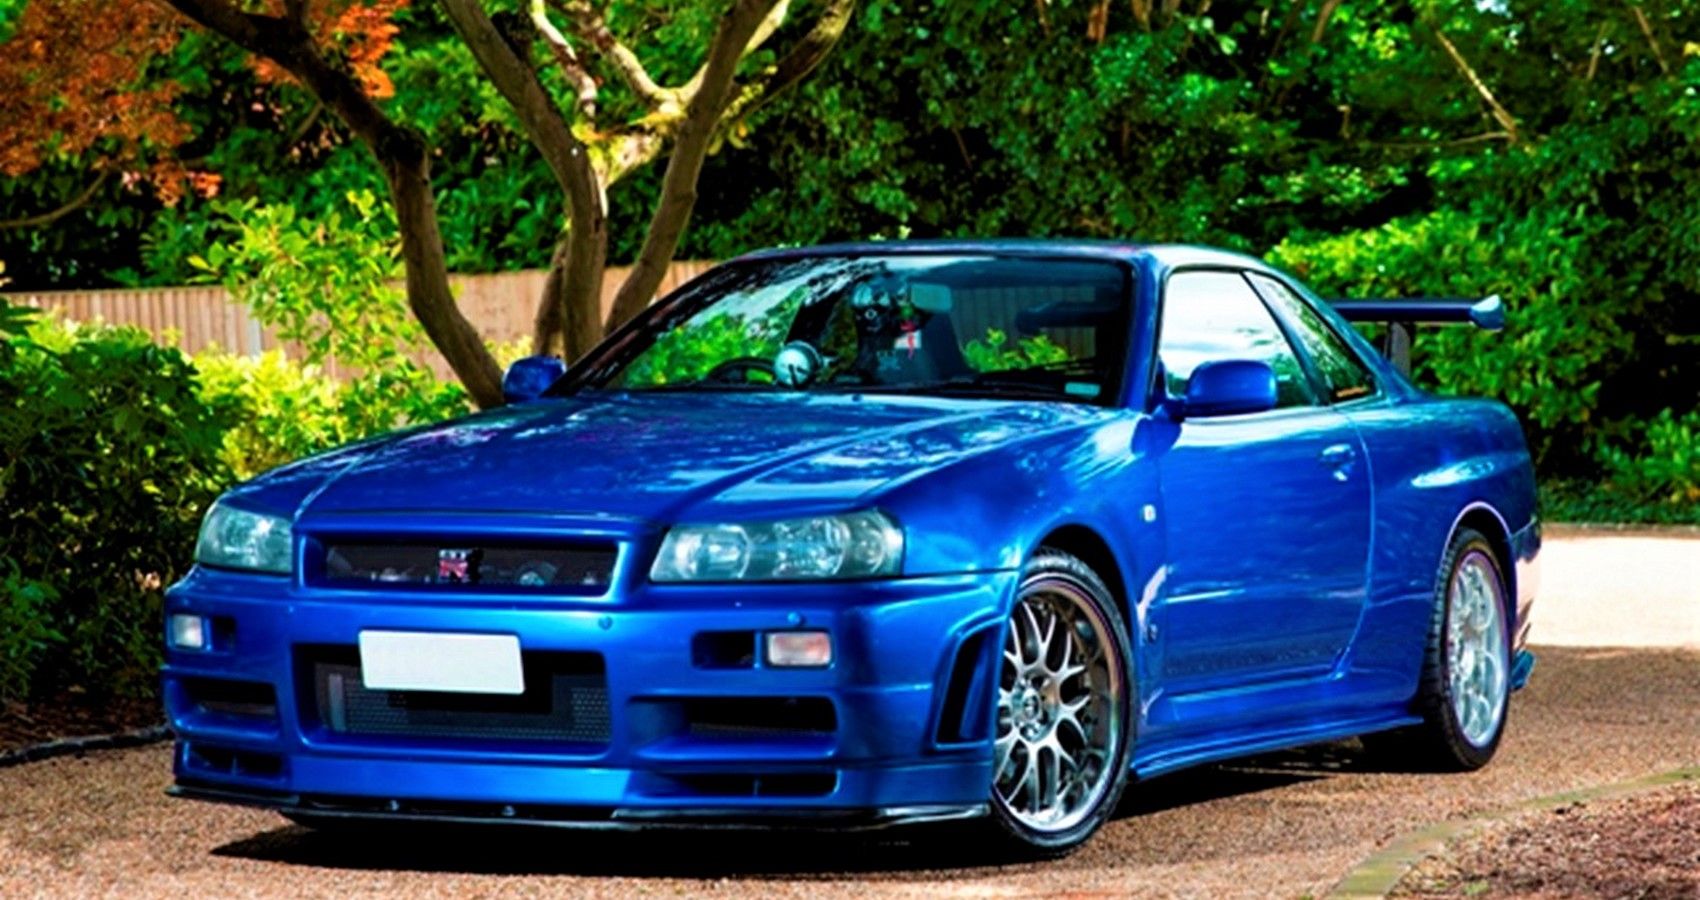 Paul Walker's 2000 Nissan Skyline R34 GT-R from Fast & Furious 4 set to  sell for eye-watering amount at auction